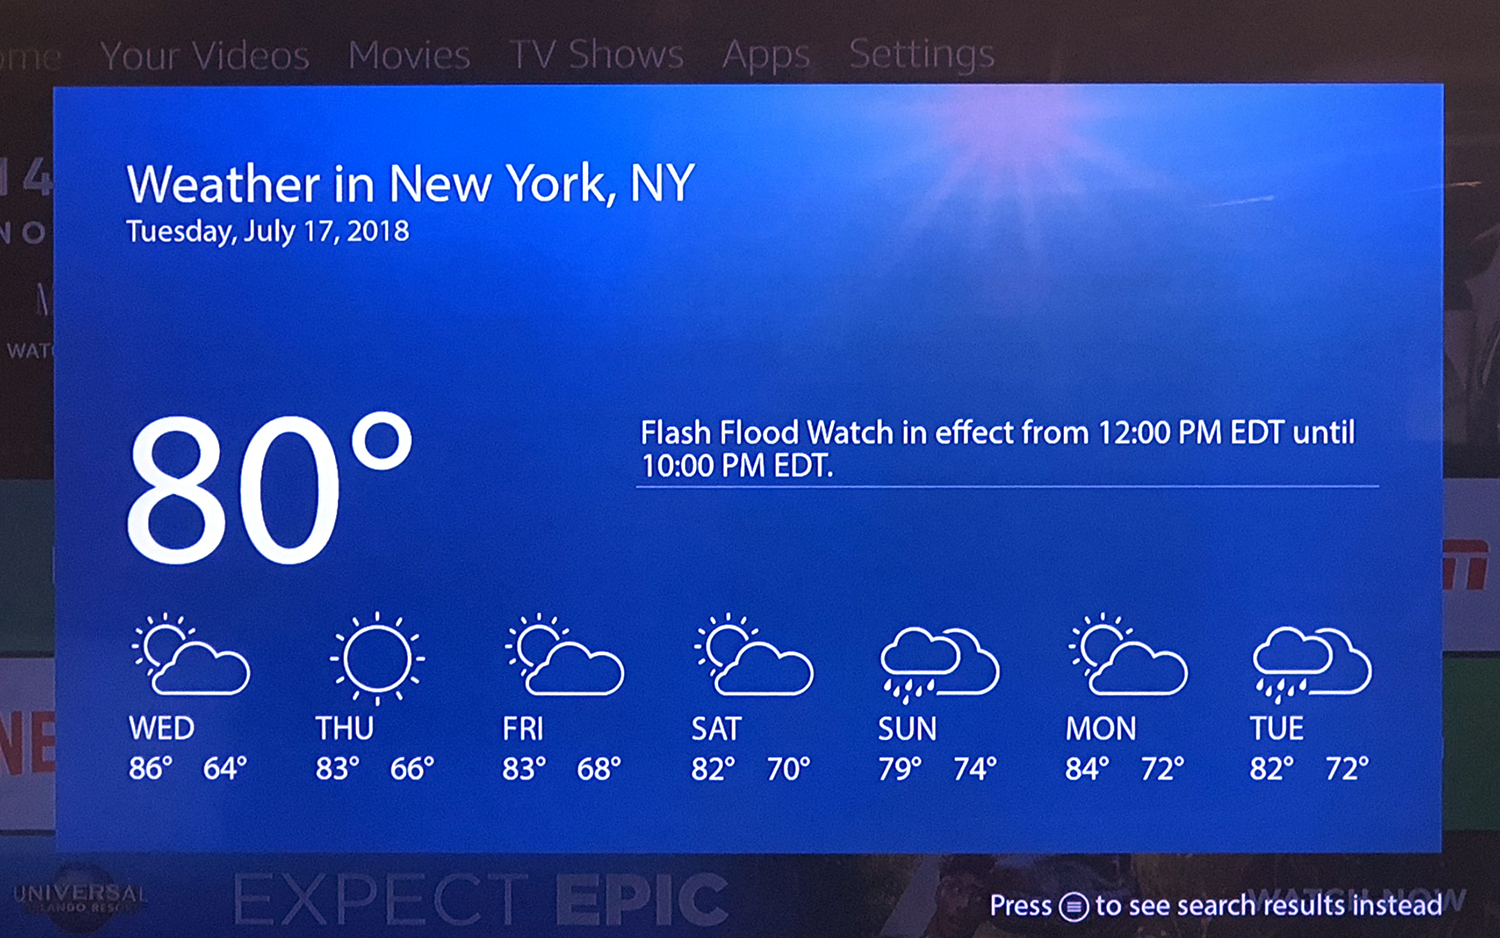 The Fire TV Stick interface with the weather